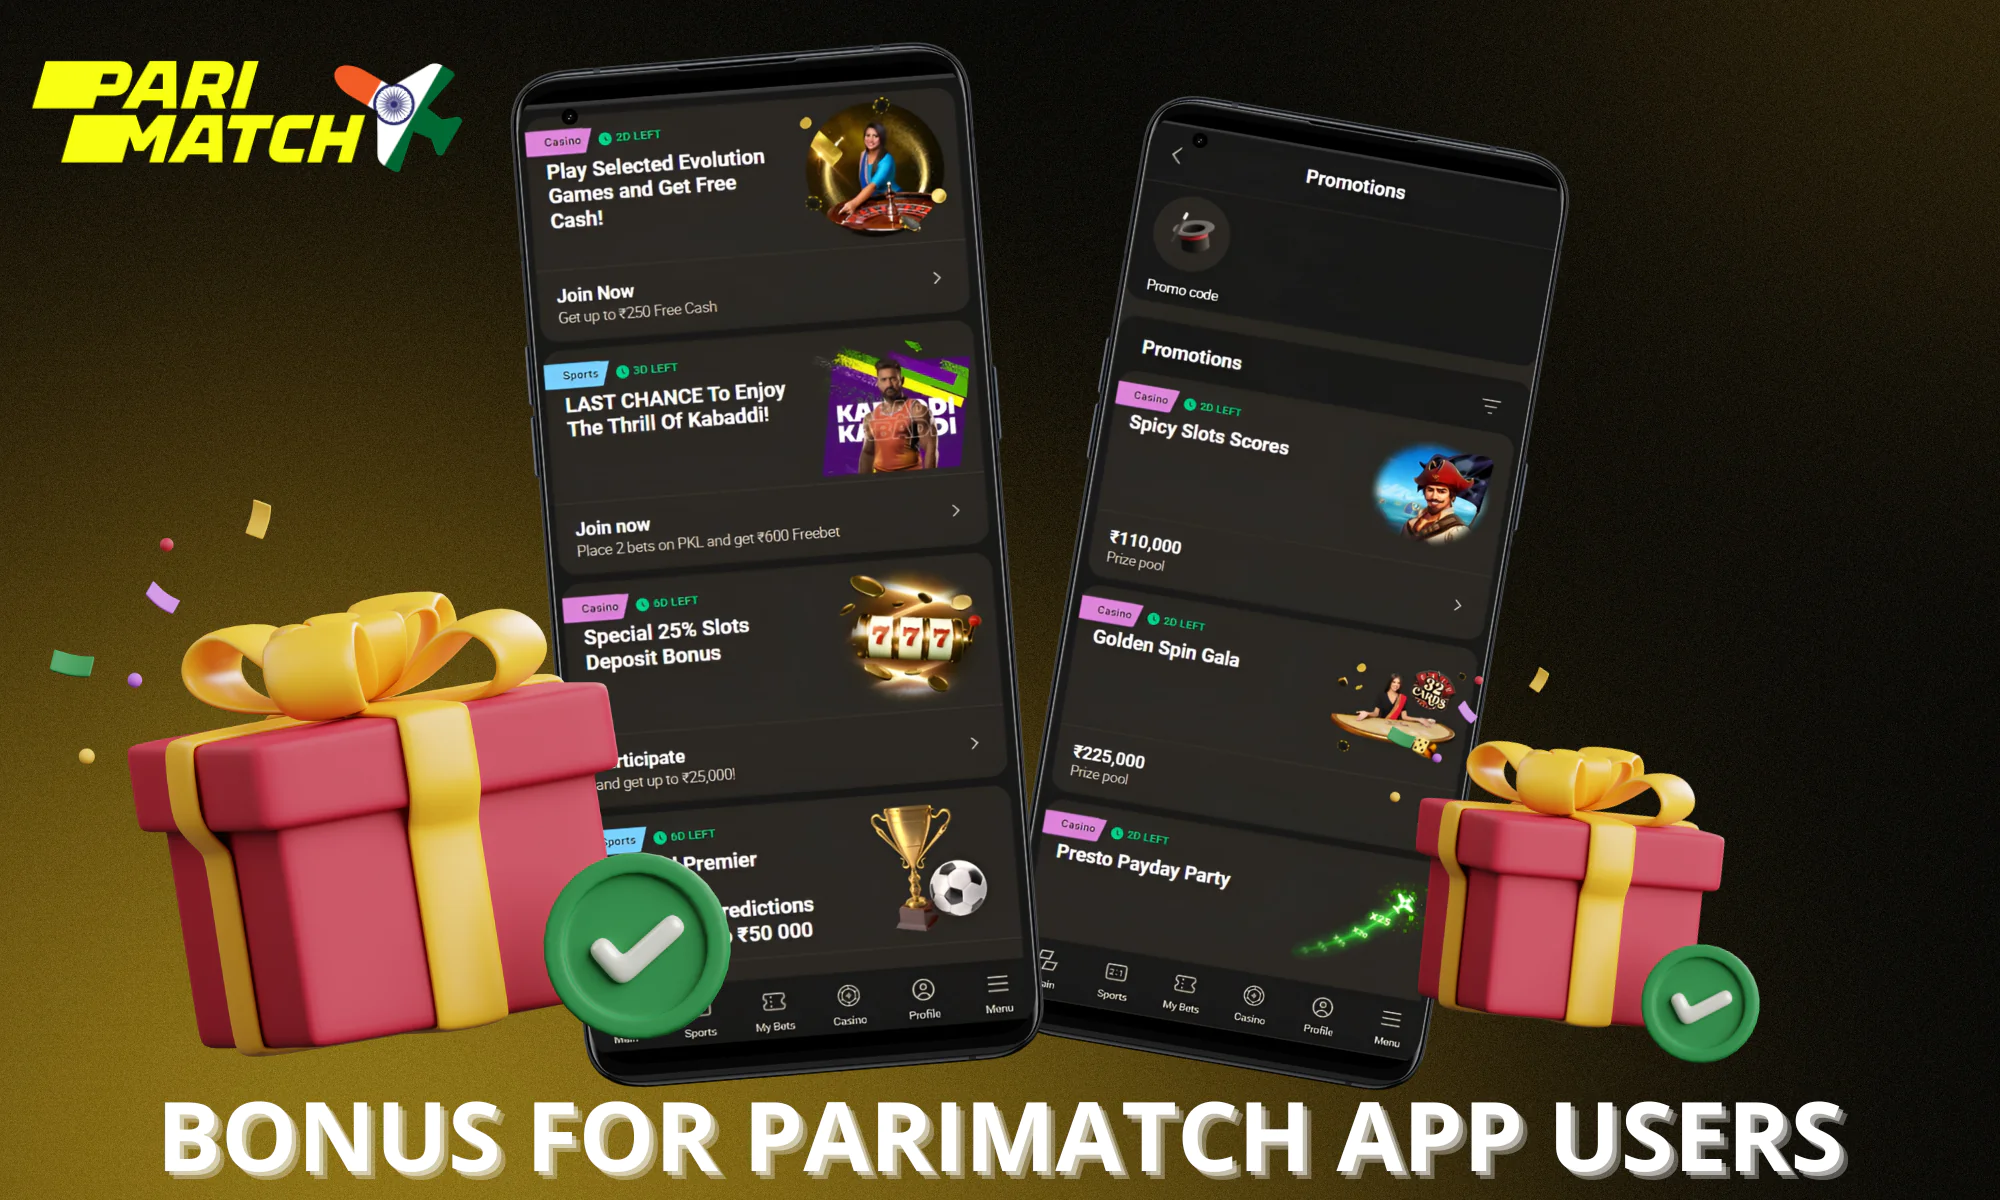 Special bonuses and promotions are available to users of the Parimatch app